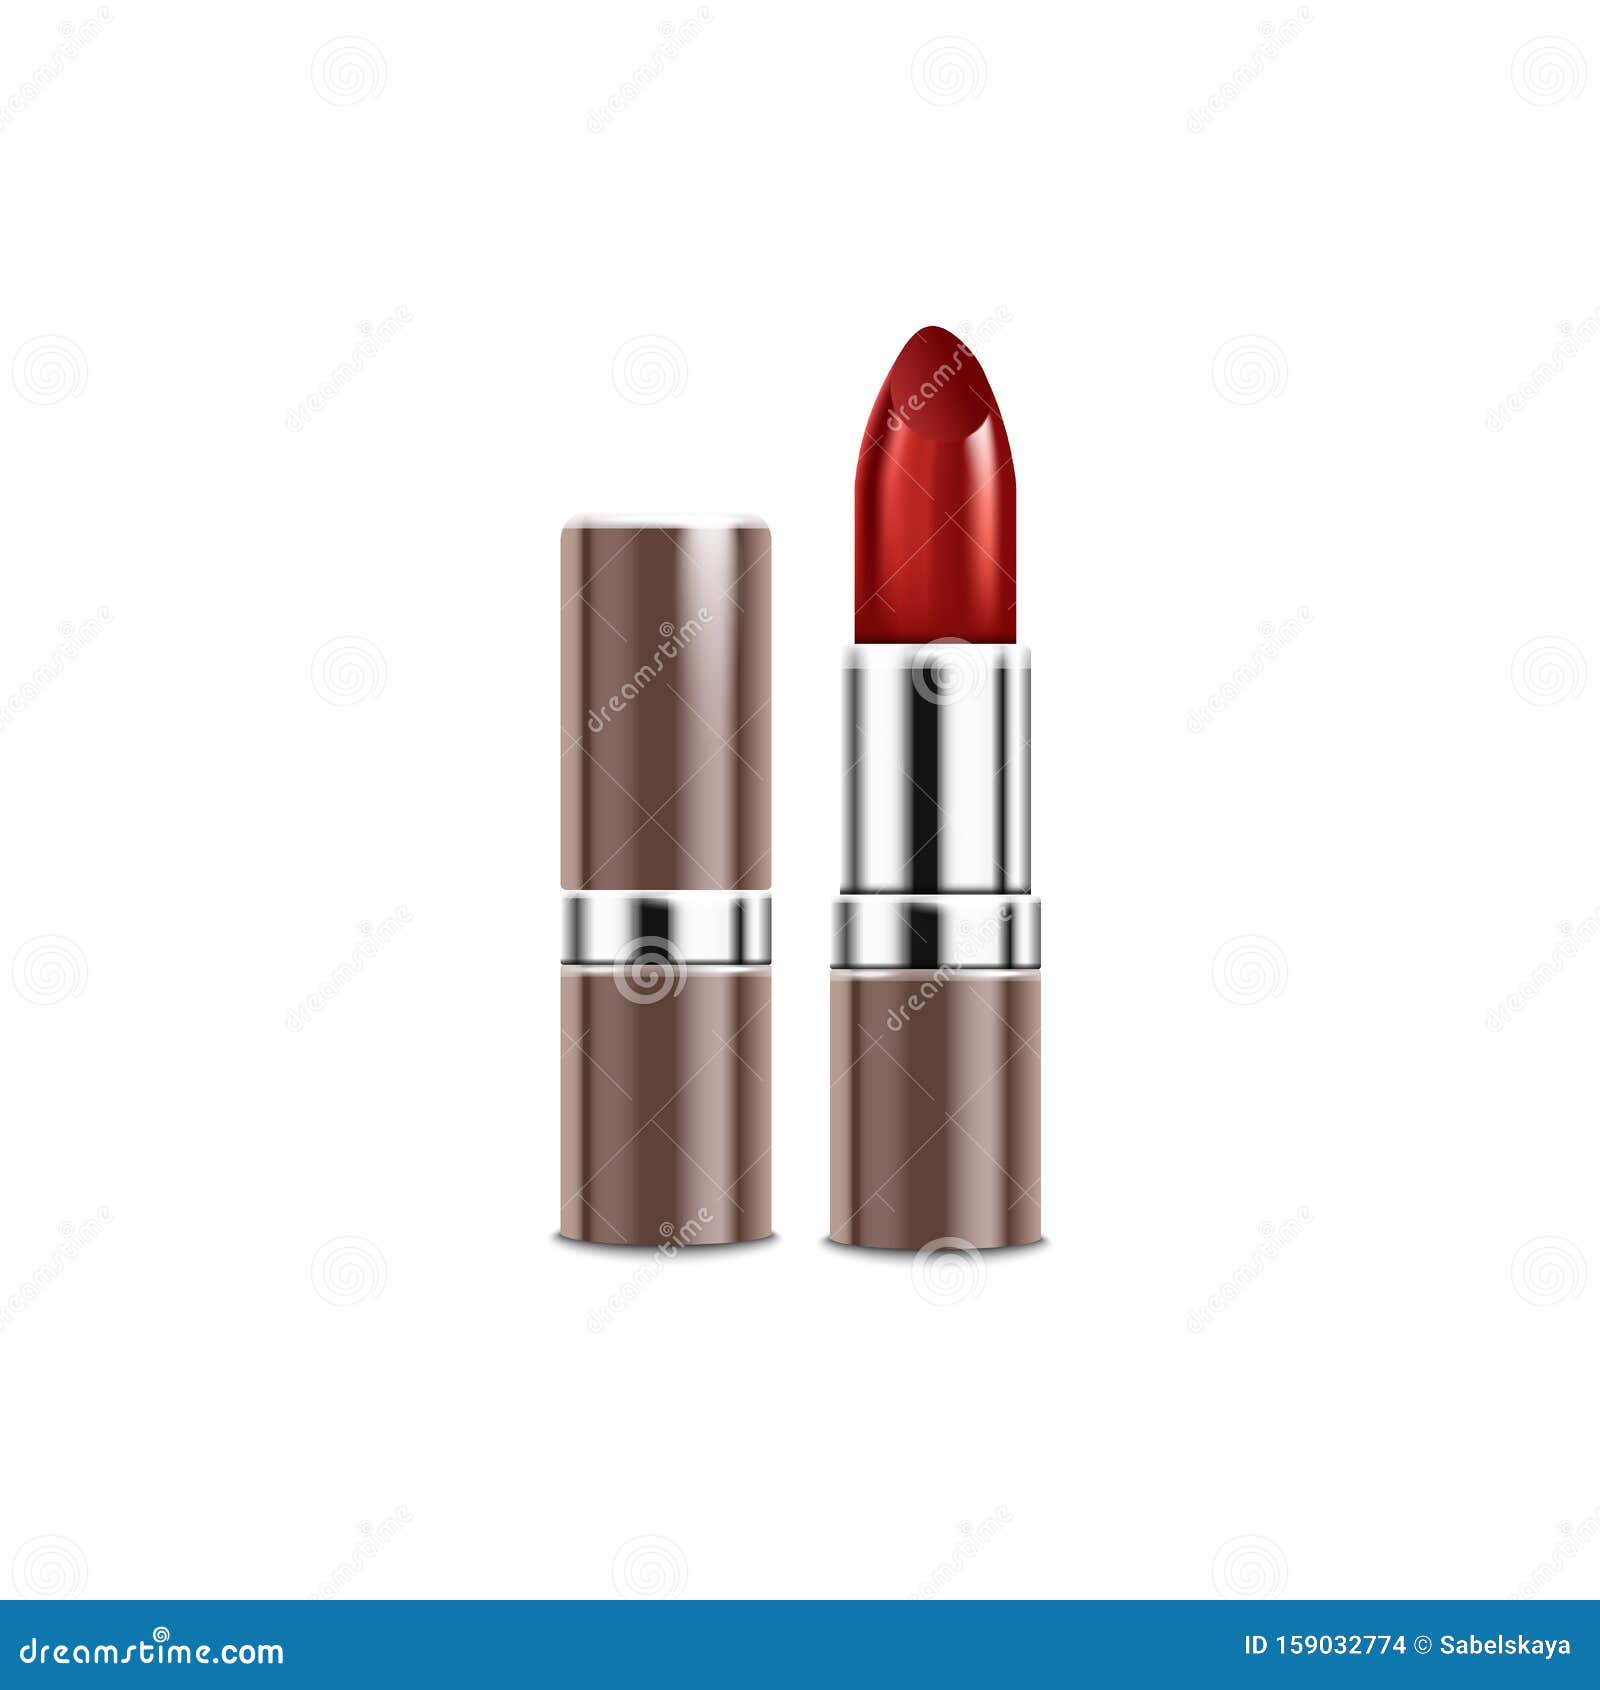 Download Realistic Red Lipstick Mockup - Open And Closed Light ...